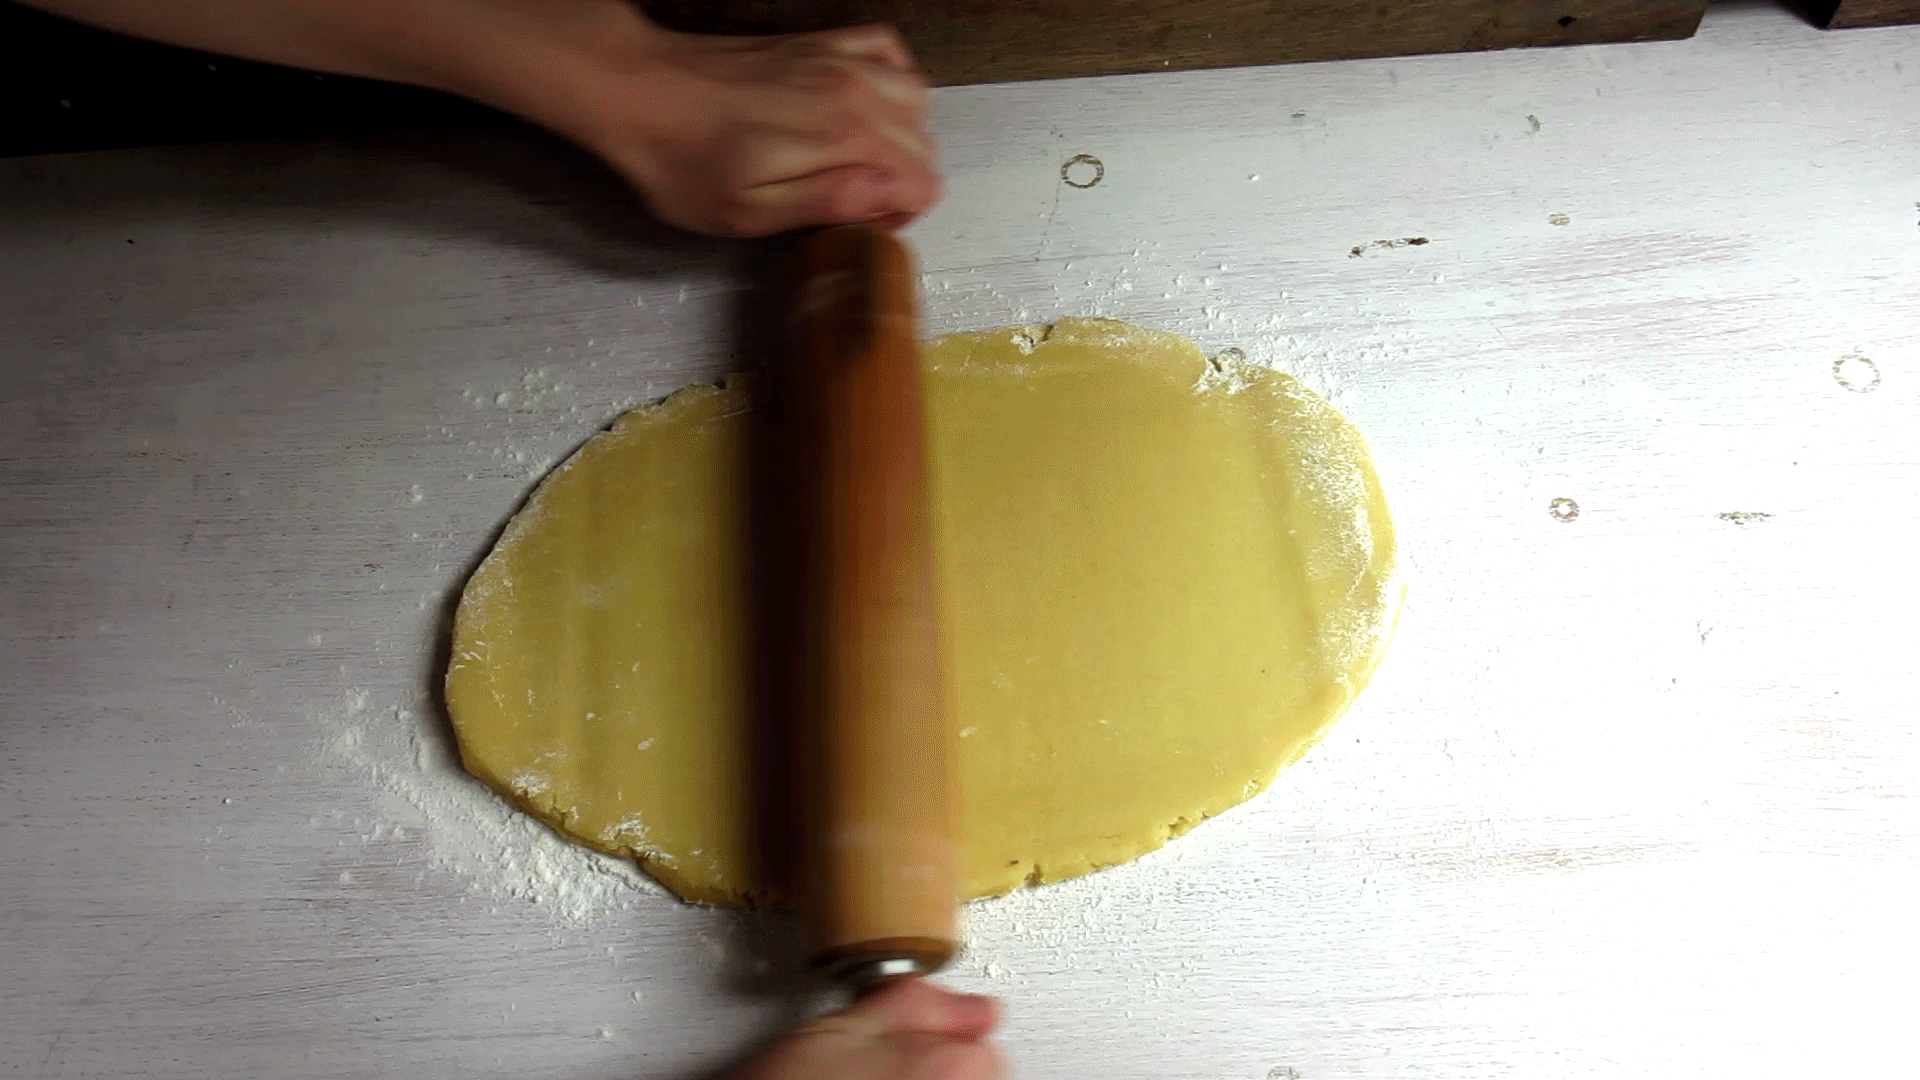 rolling out cookie dough